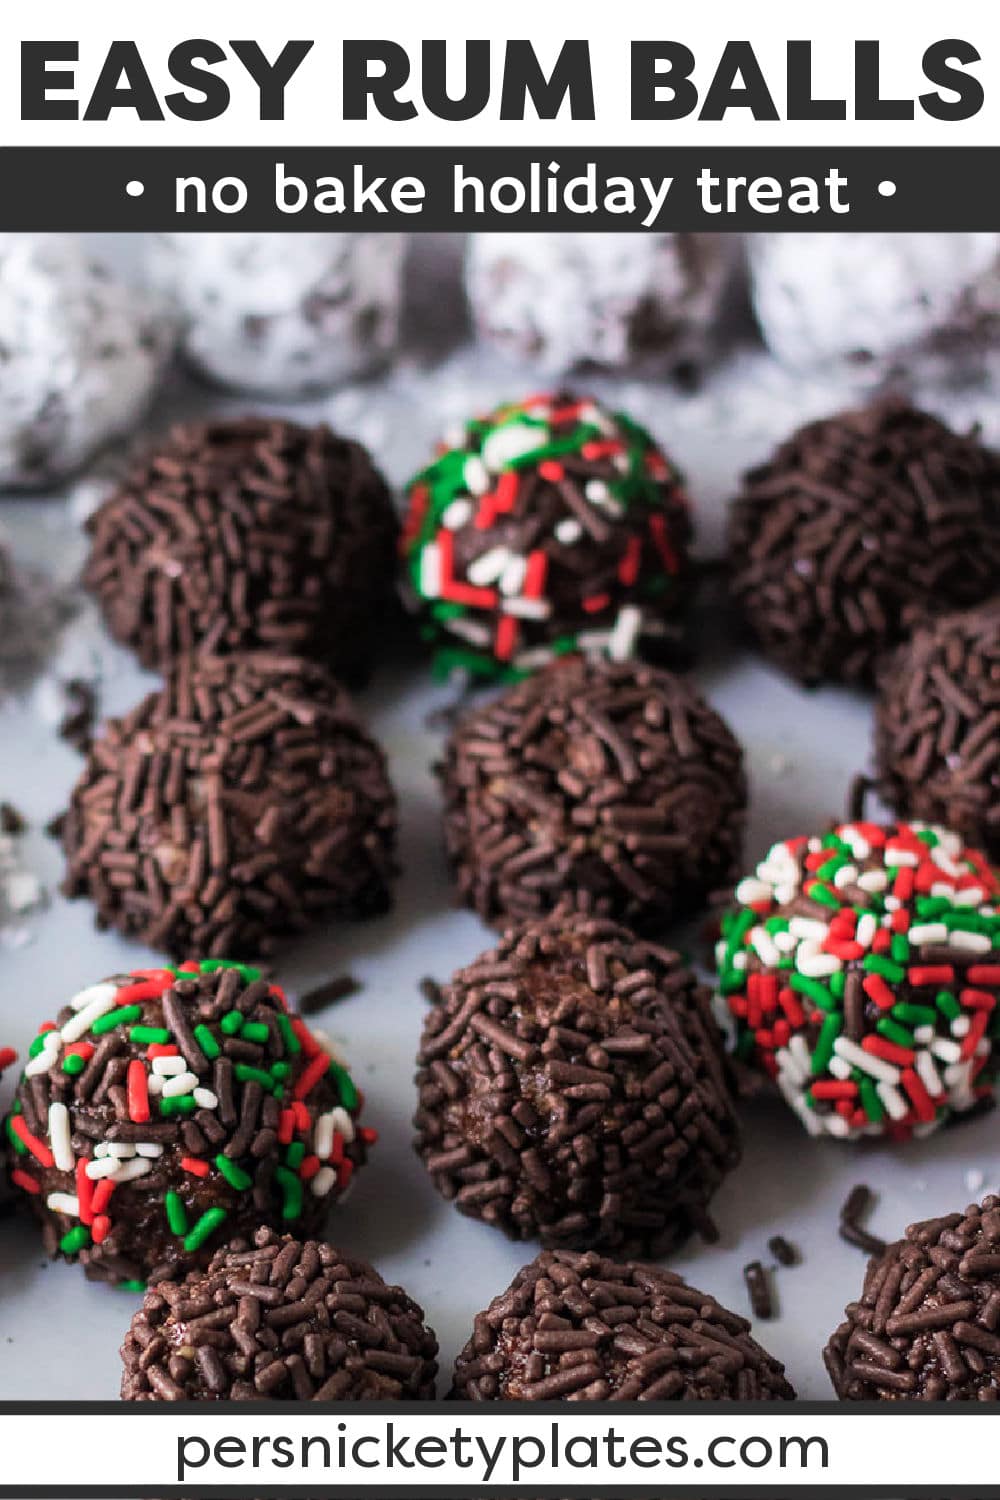 Traditional rum balls are an easy, no-bake holiday staple. Vanilla wafers, cocoa powder, pecans, and honey come together with powdered sugar and sprinkles to give them a sweet, chocolatey, nutty flavor, with a kick of rum! | www.persnicketyplates.com